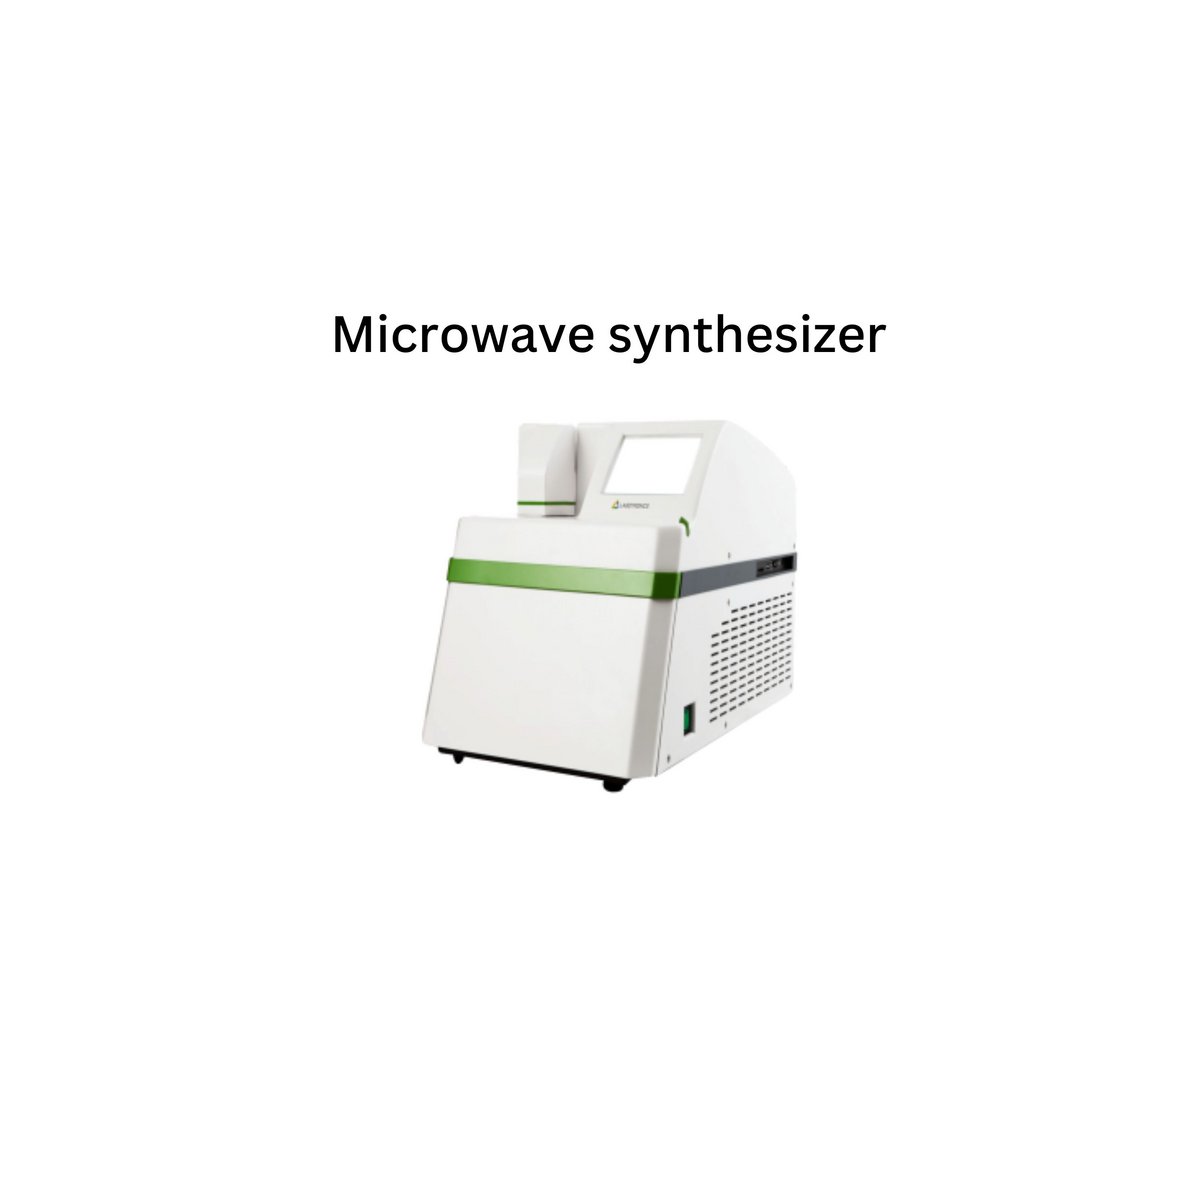 Microwave synthesizer.jpg